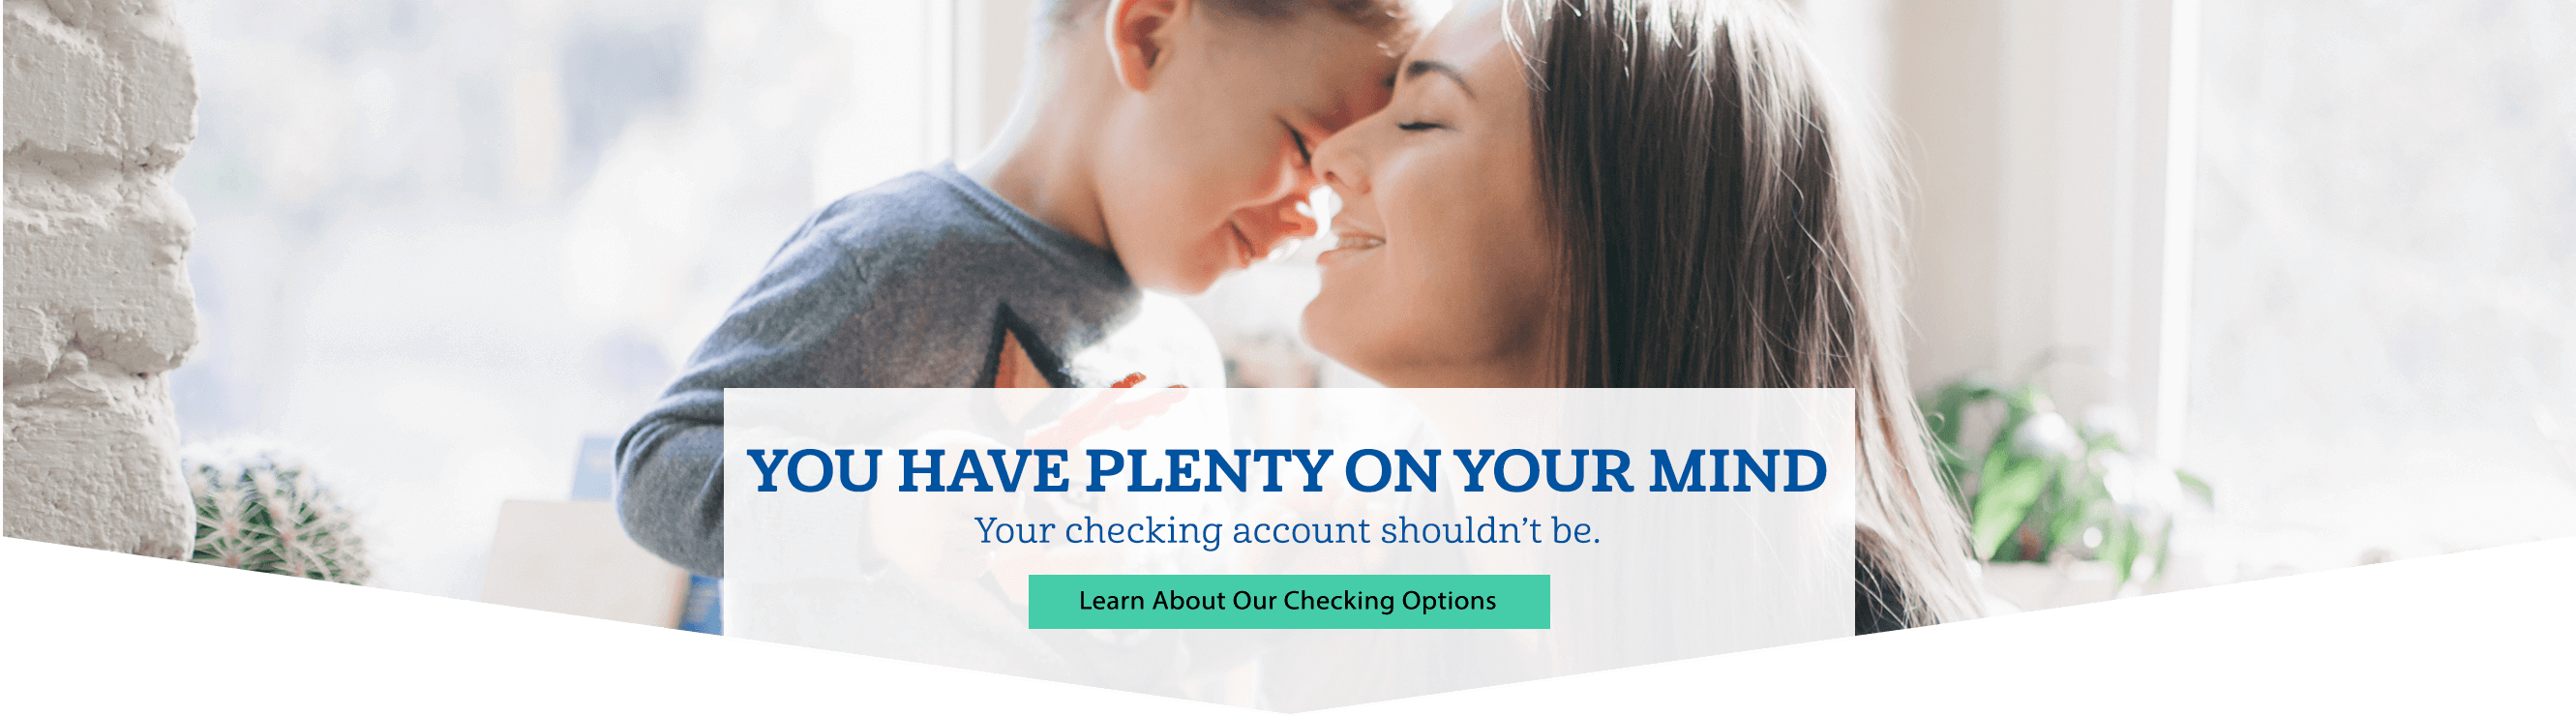 You have plenty on your mind. Your checking account shouldn't be. Learn about our checking options.